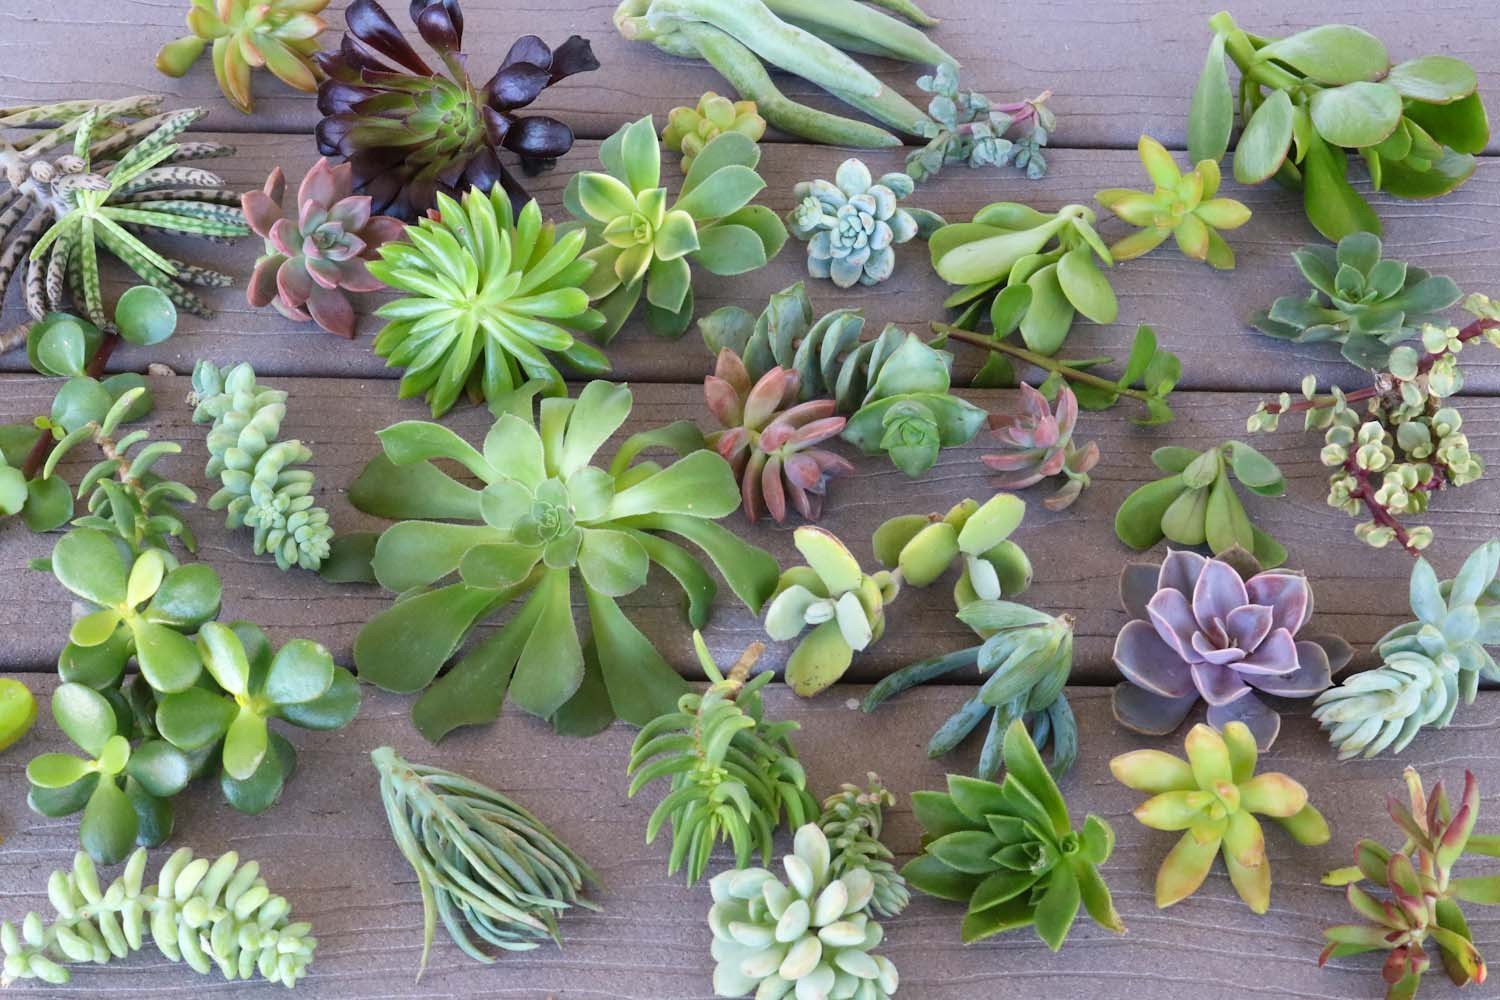 many succulents that are on a wooden surface